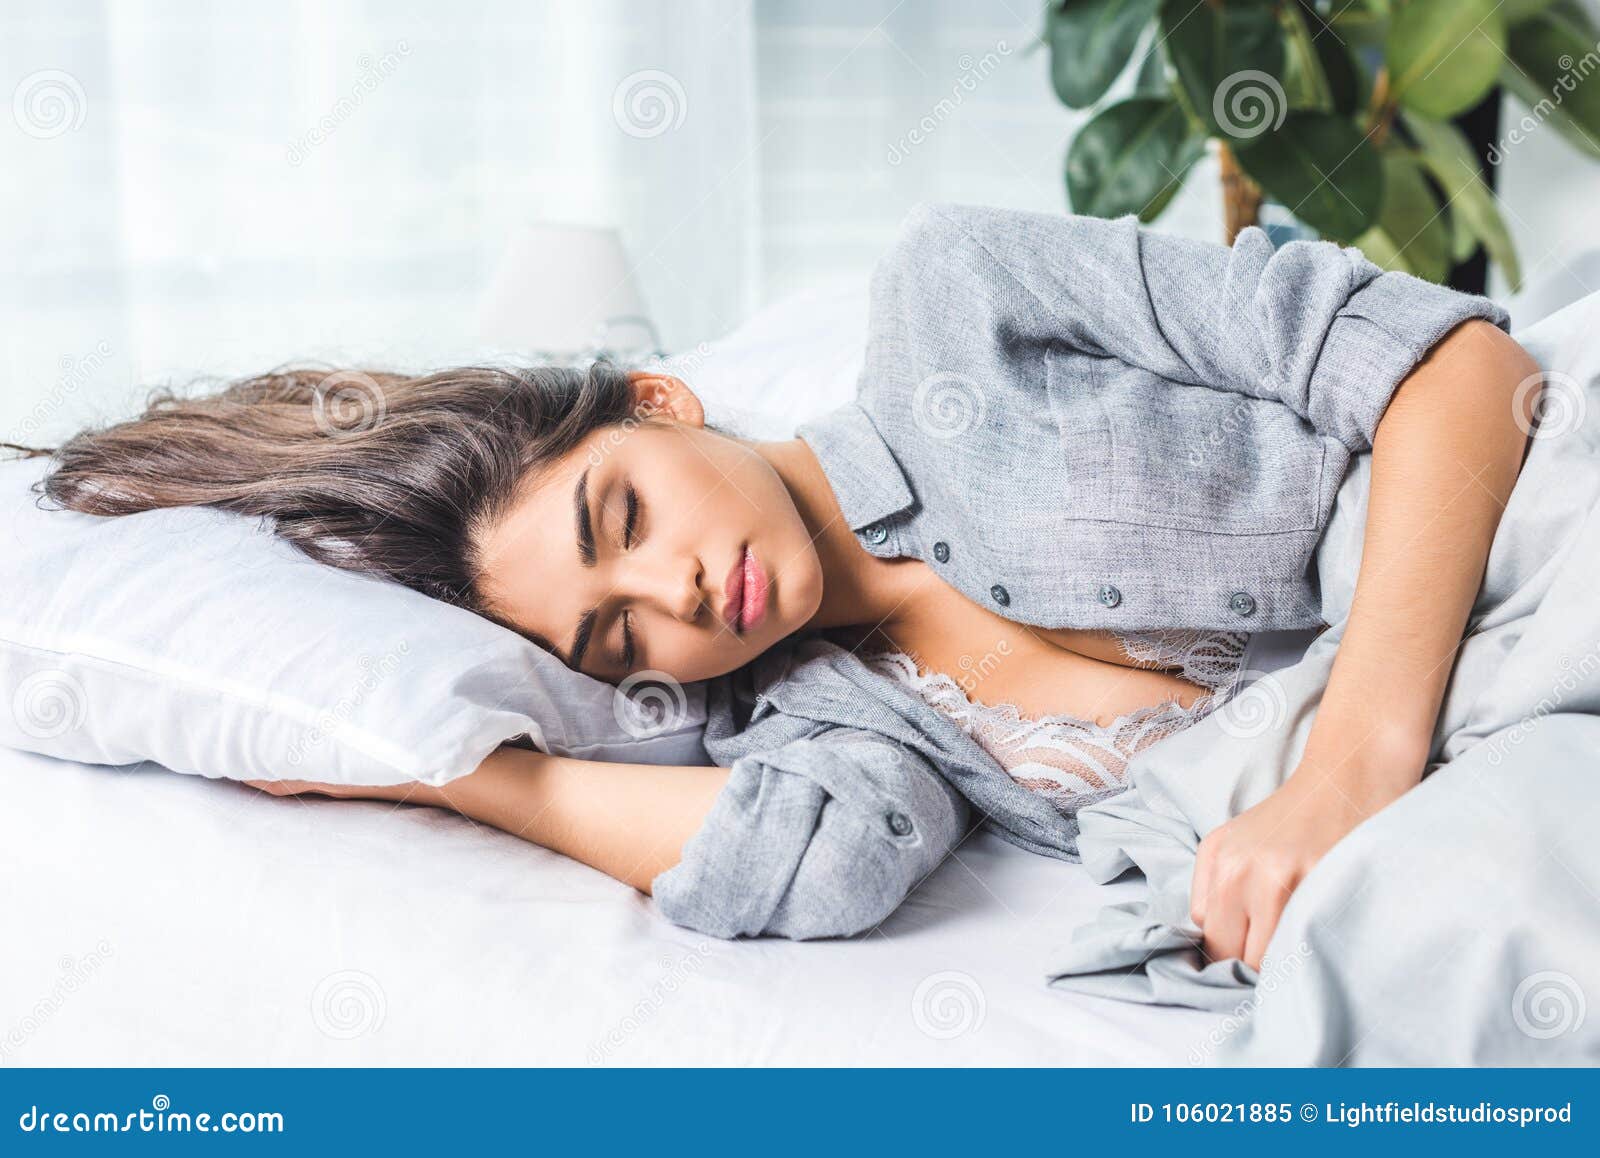 sensual brunette young woman in black bra sleeping on bed Stock Photo